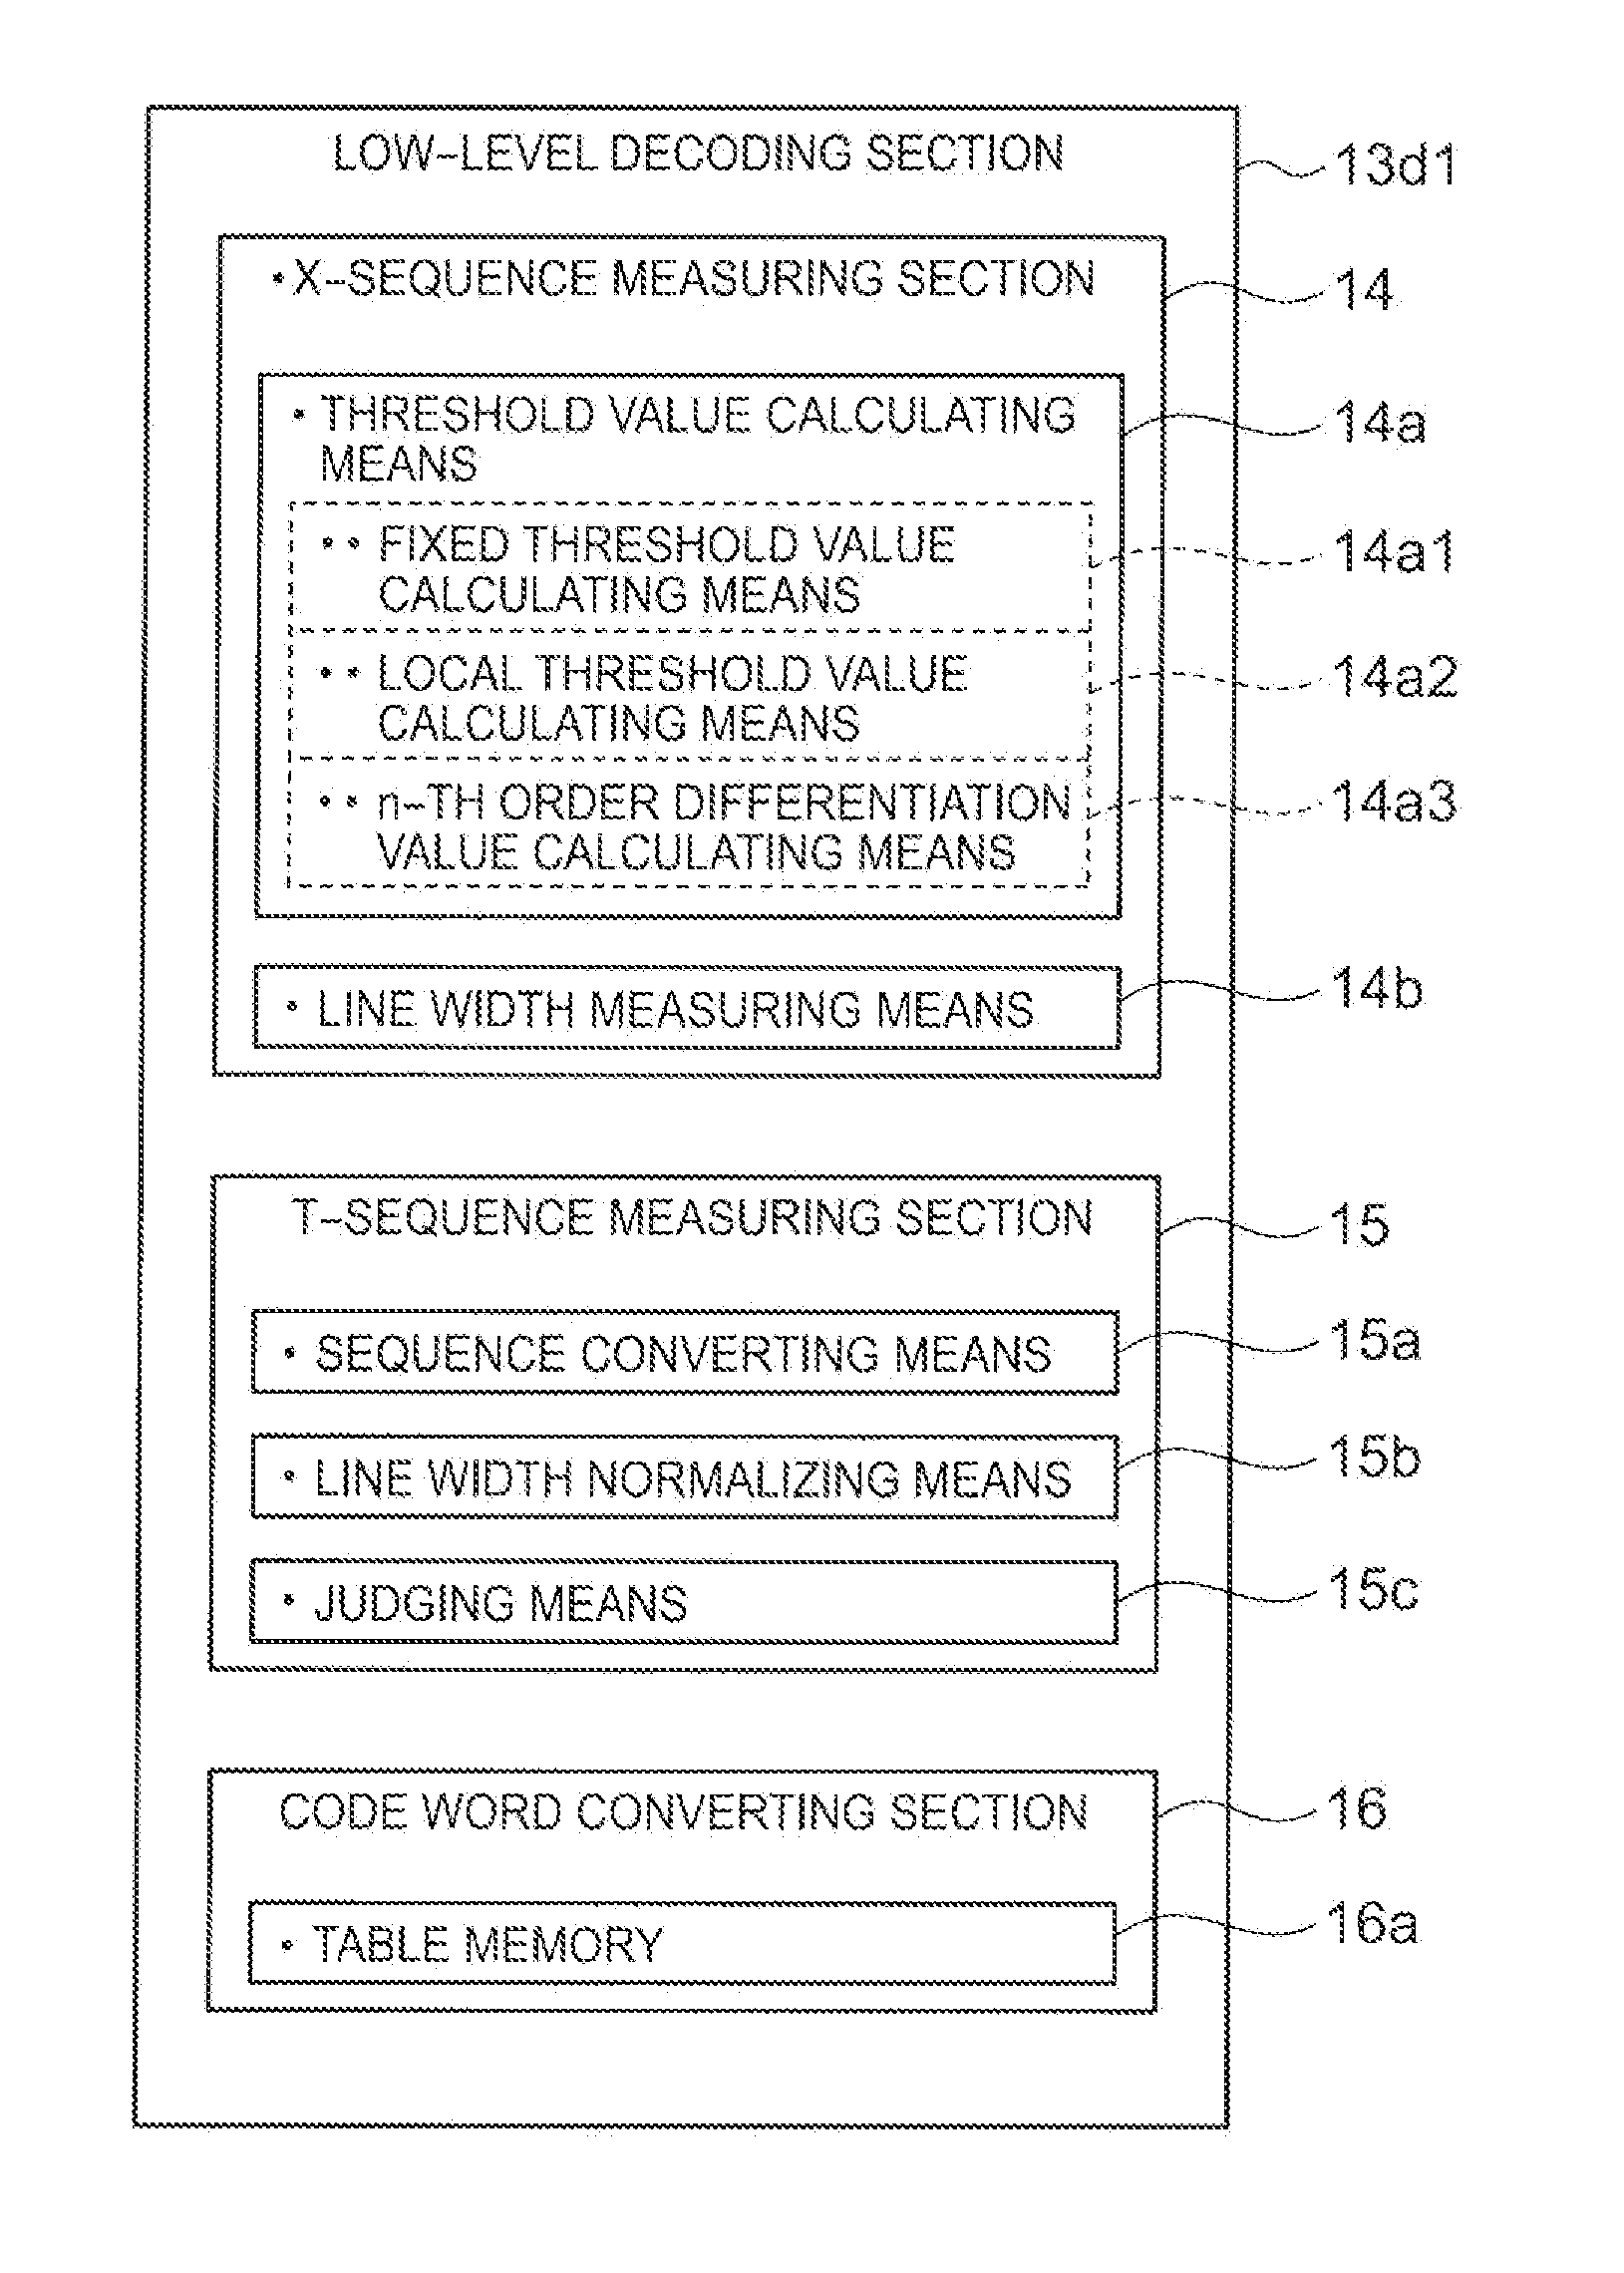 Stacked barcode reader and stacked barcode reading method